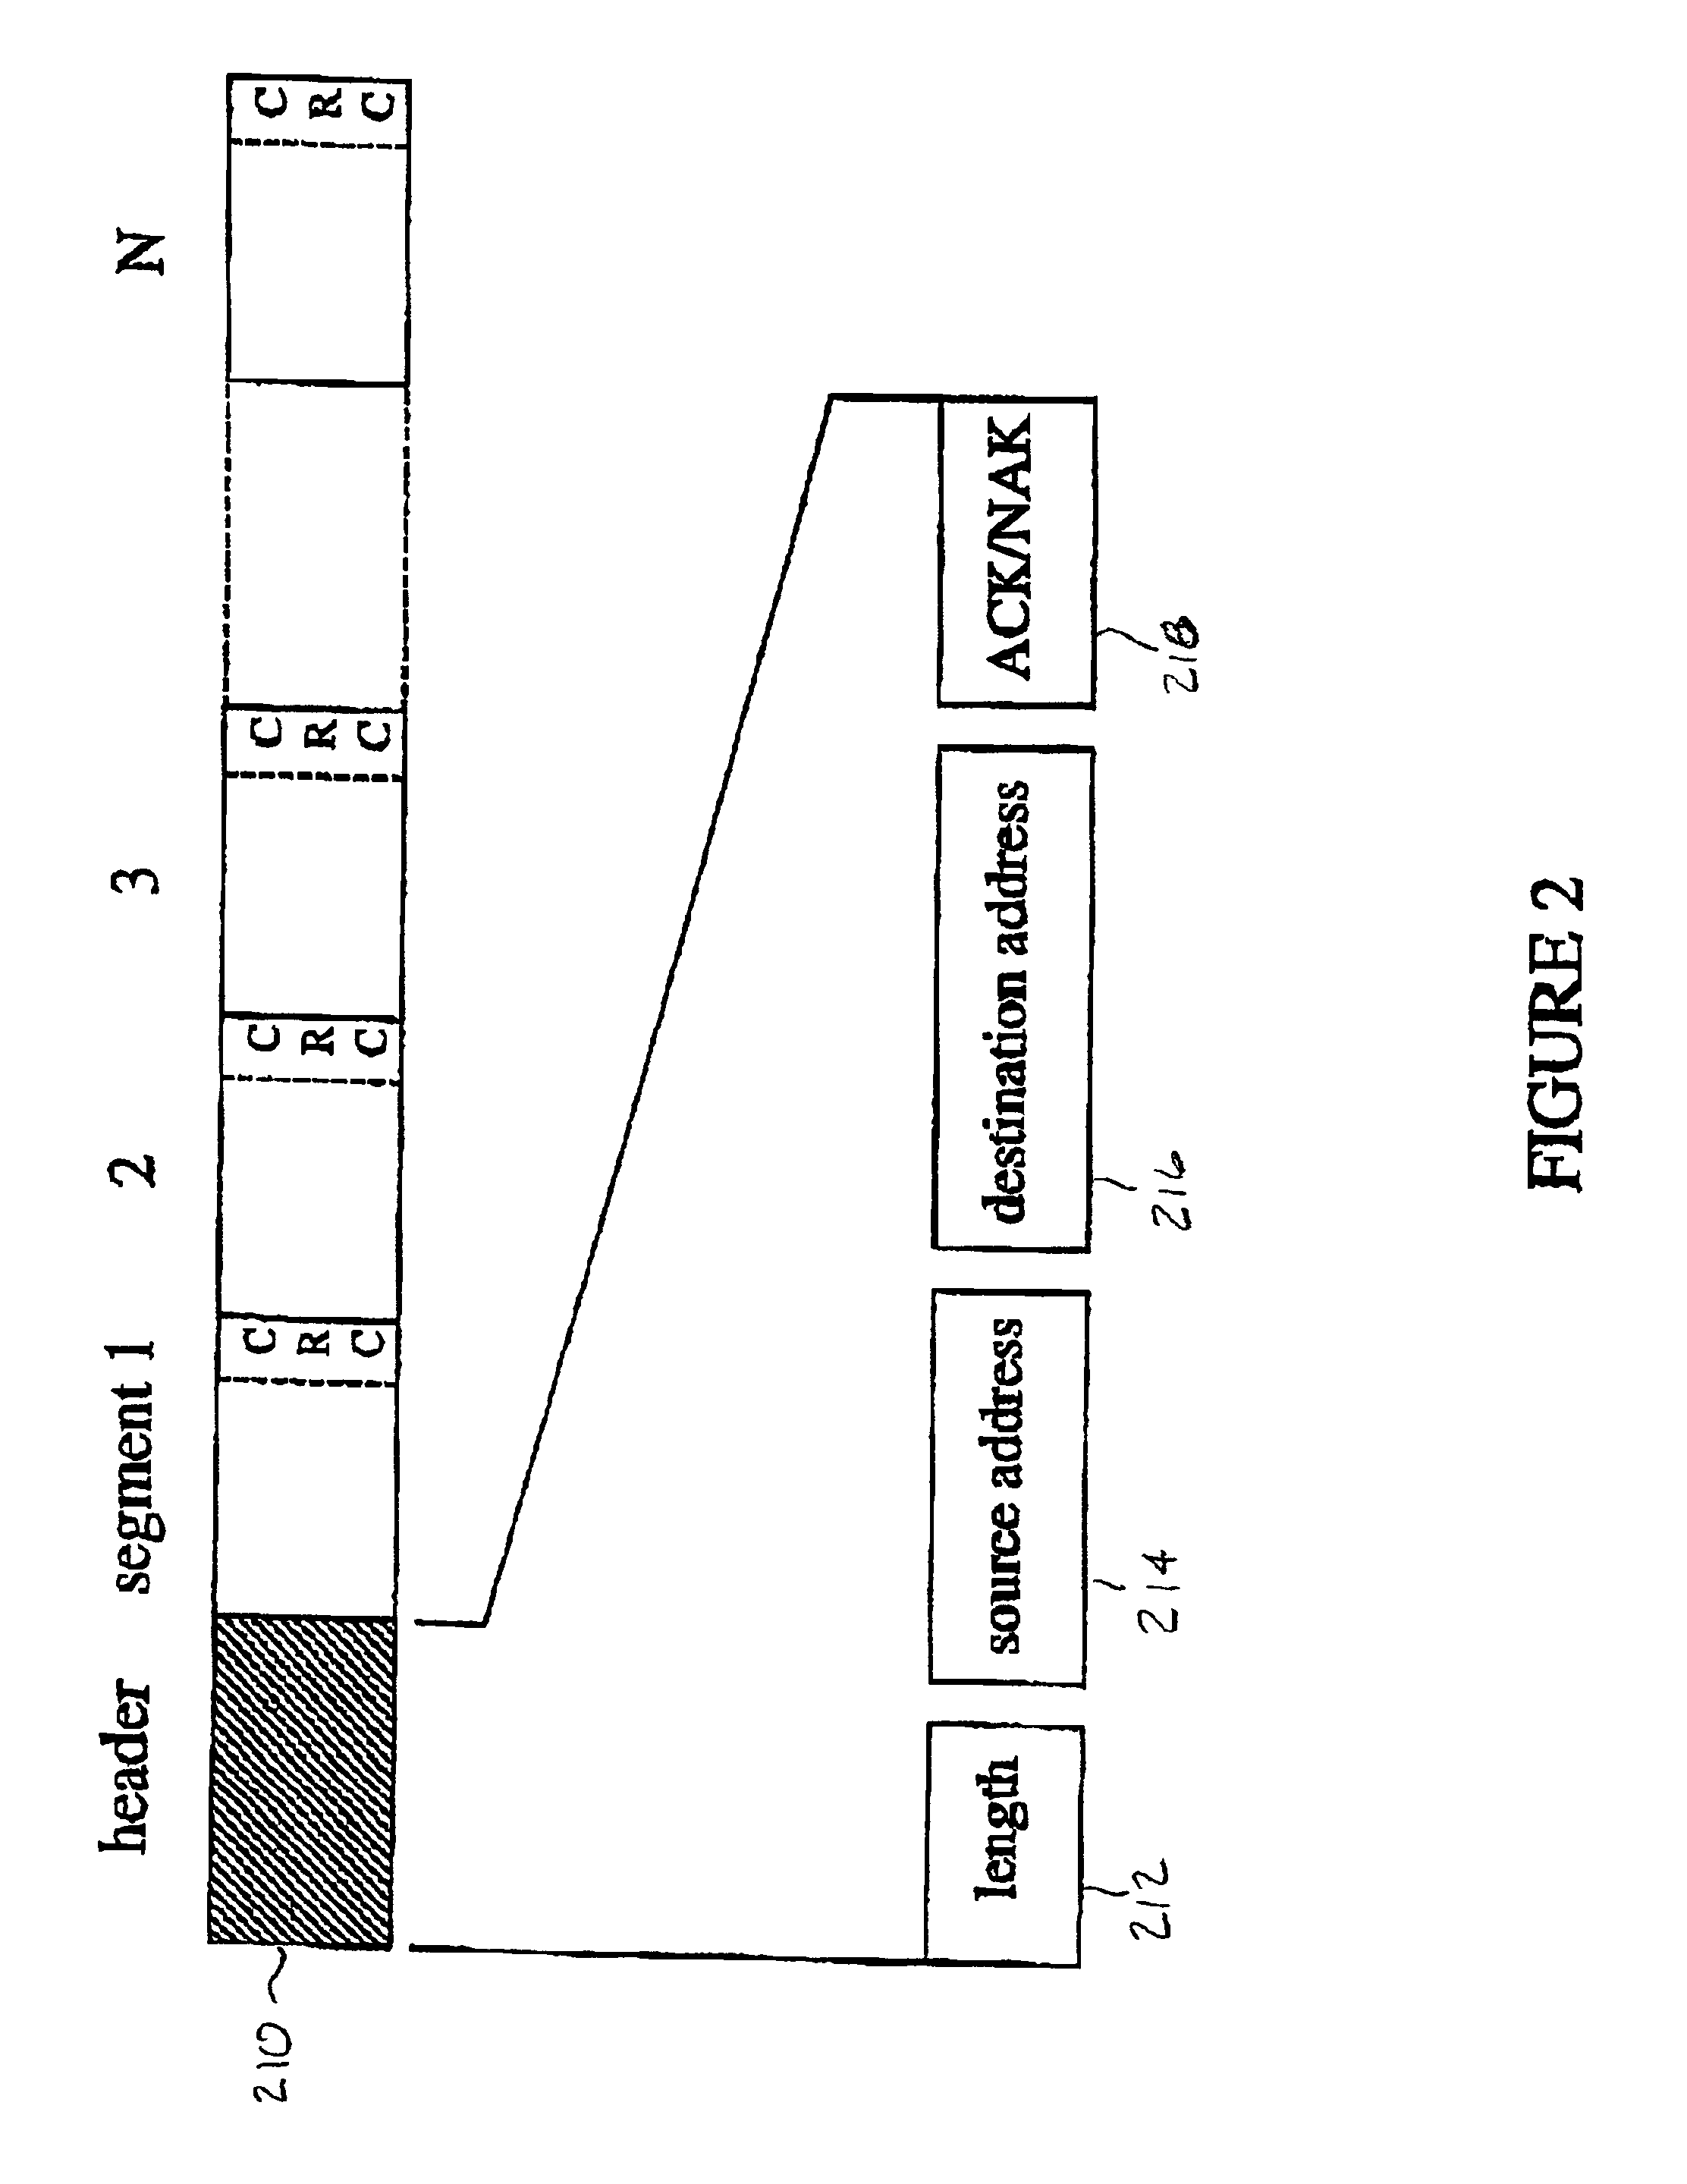 System and method for providing quality of service and contention resolution in ad-hoc communication systems